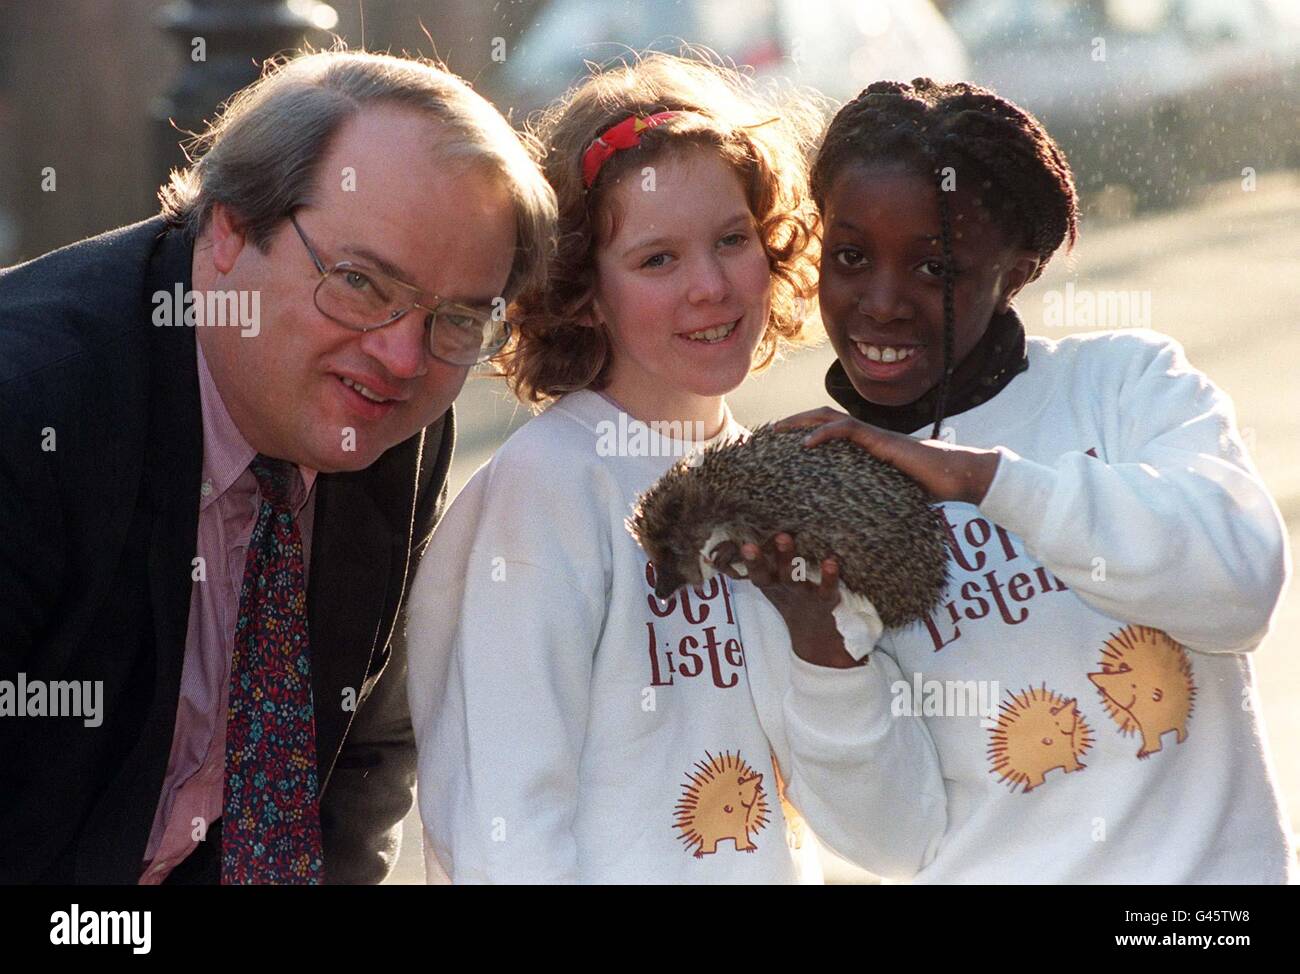 Road Safety Minister John Bowis enlists the help of Jessica O'Sullivan (cen), Amifa Tholley and a hedgehog in London today (Tue) to help launch a new national advertising campaign which aims to drive down deaths and injuries to children by reminding them to take car when crossing roads. The five week, 500,000 Child Pedestrian Safety campaign features a new commercial showing two cartoon hedgehogs using their road safety skills to cross a busy road successfully. Photo by Stefan Rousseau/PA. Stock Photo